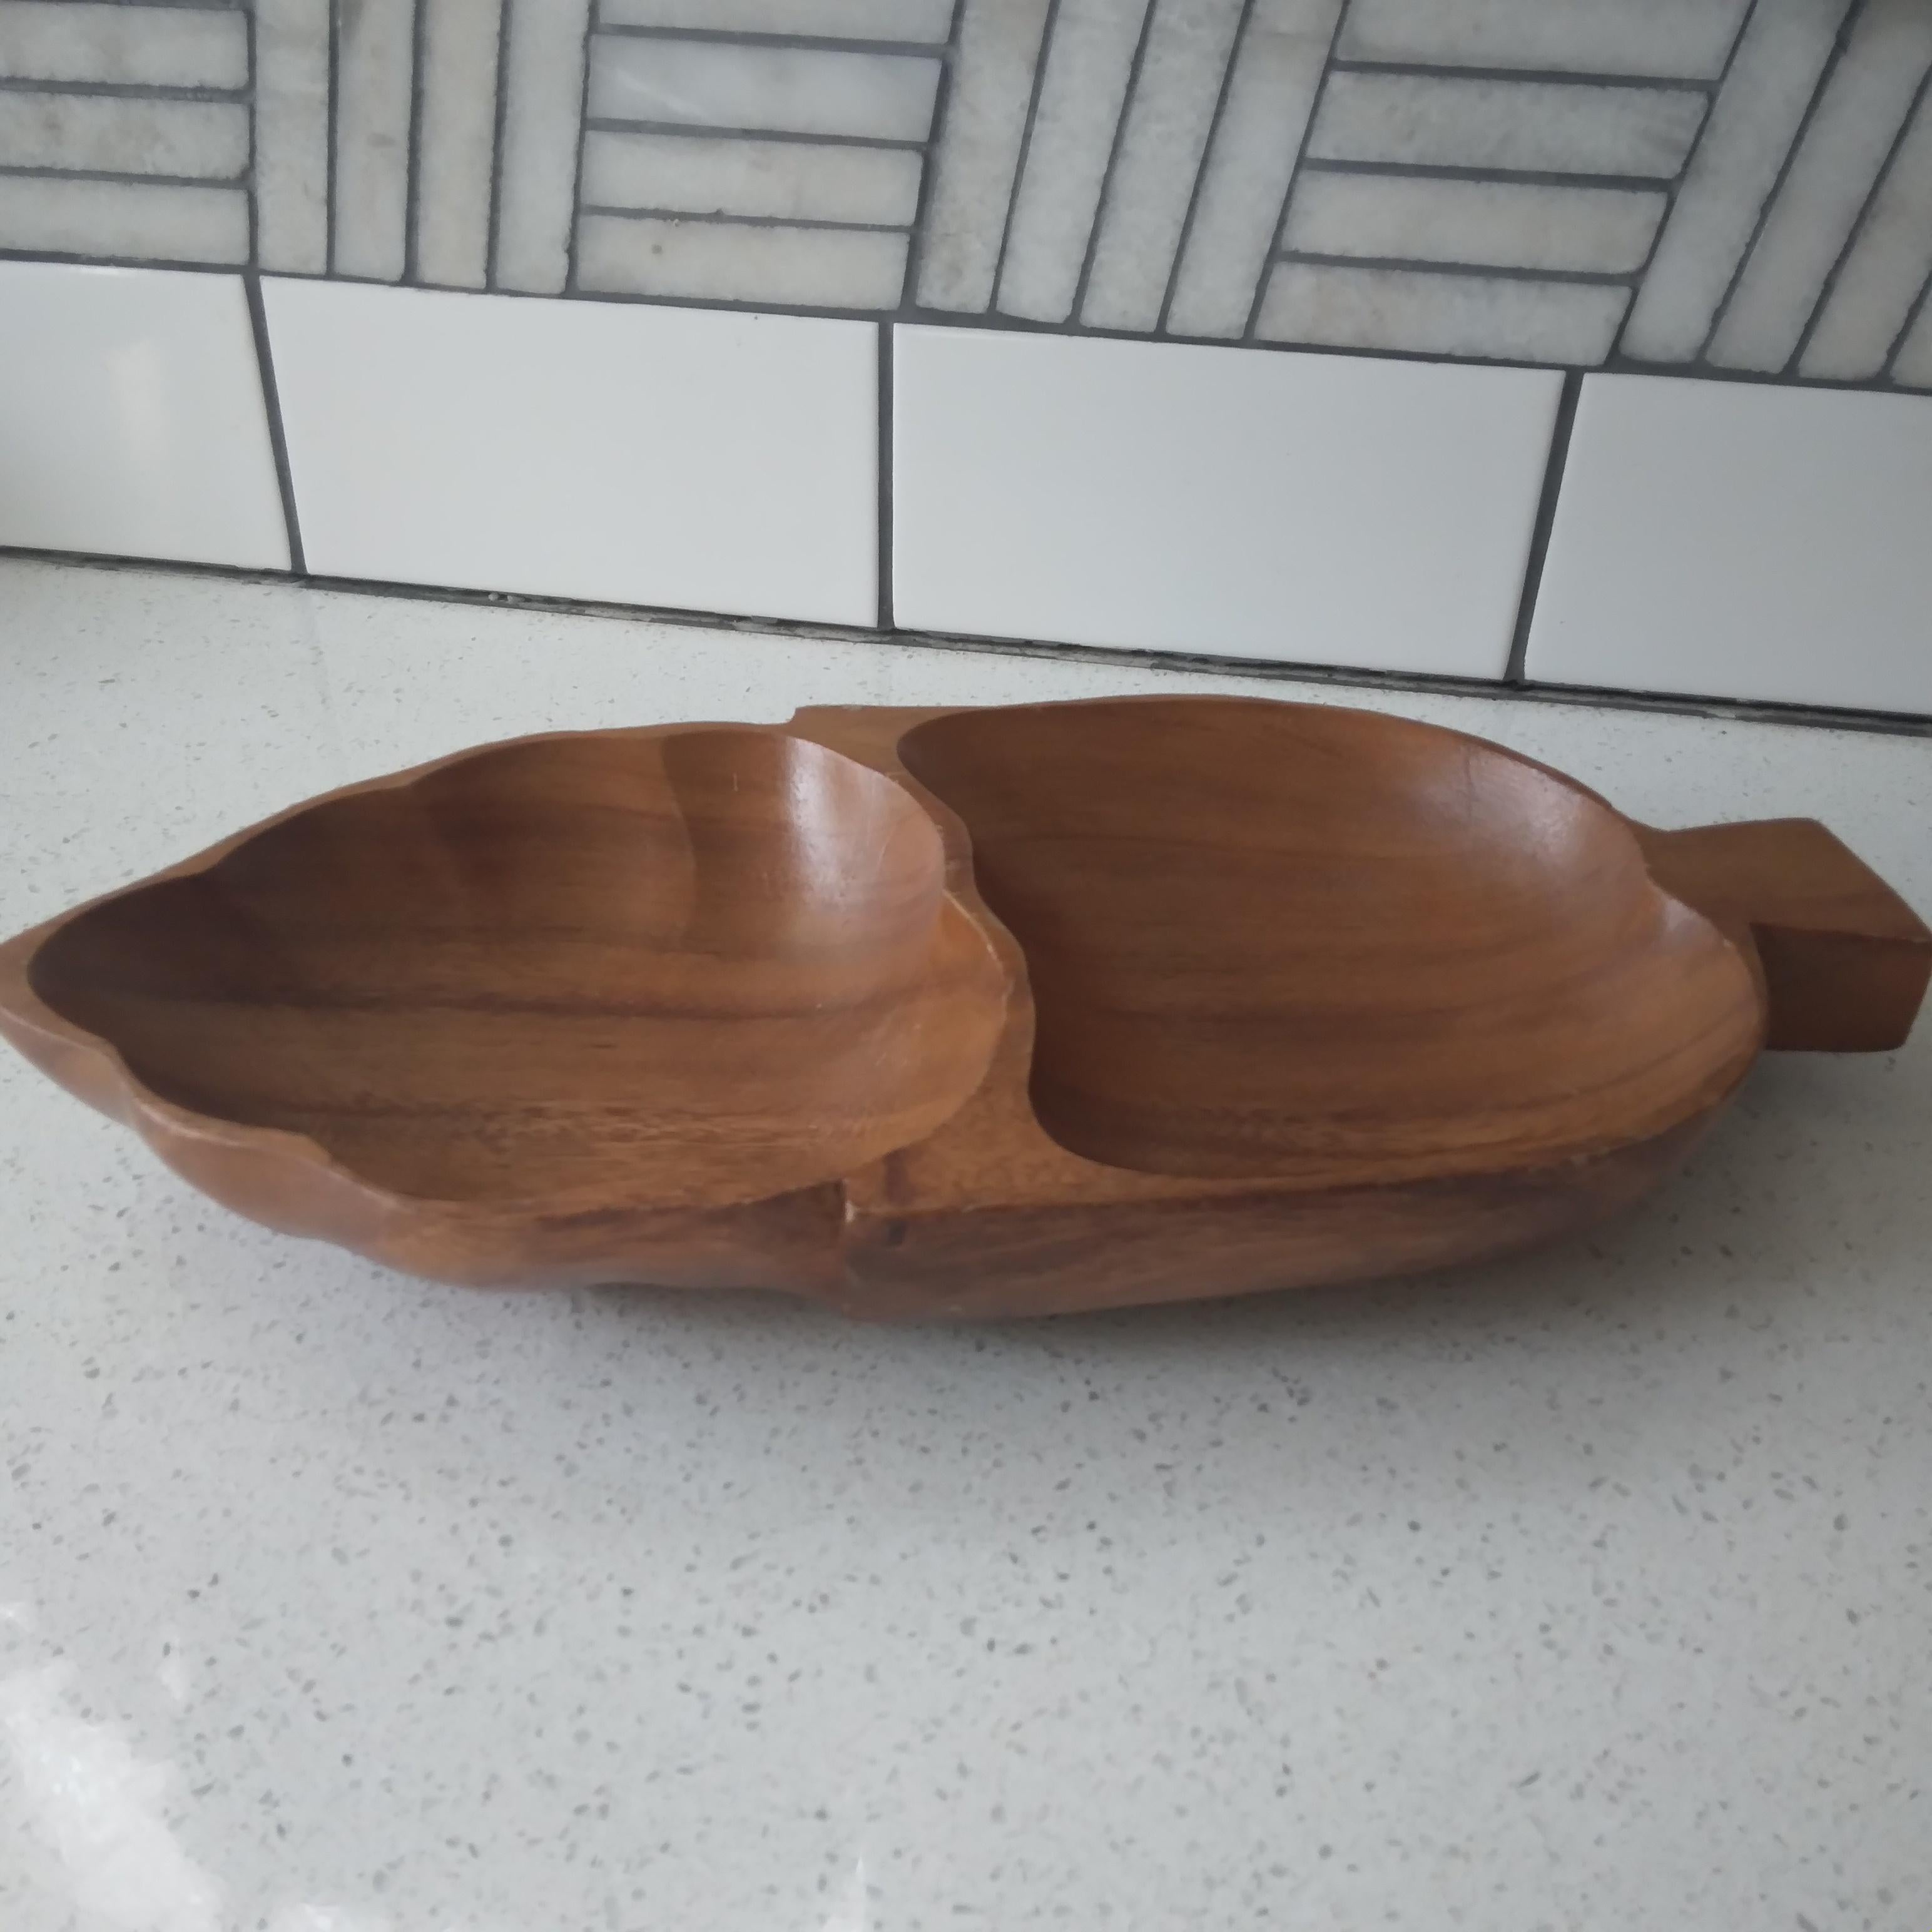 20th Century Wooden Leaf-Shaped Dish For Sale